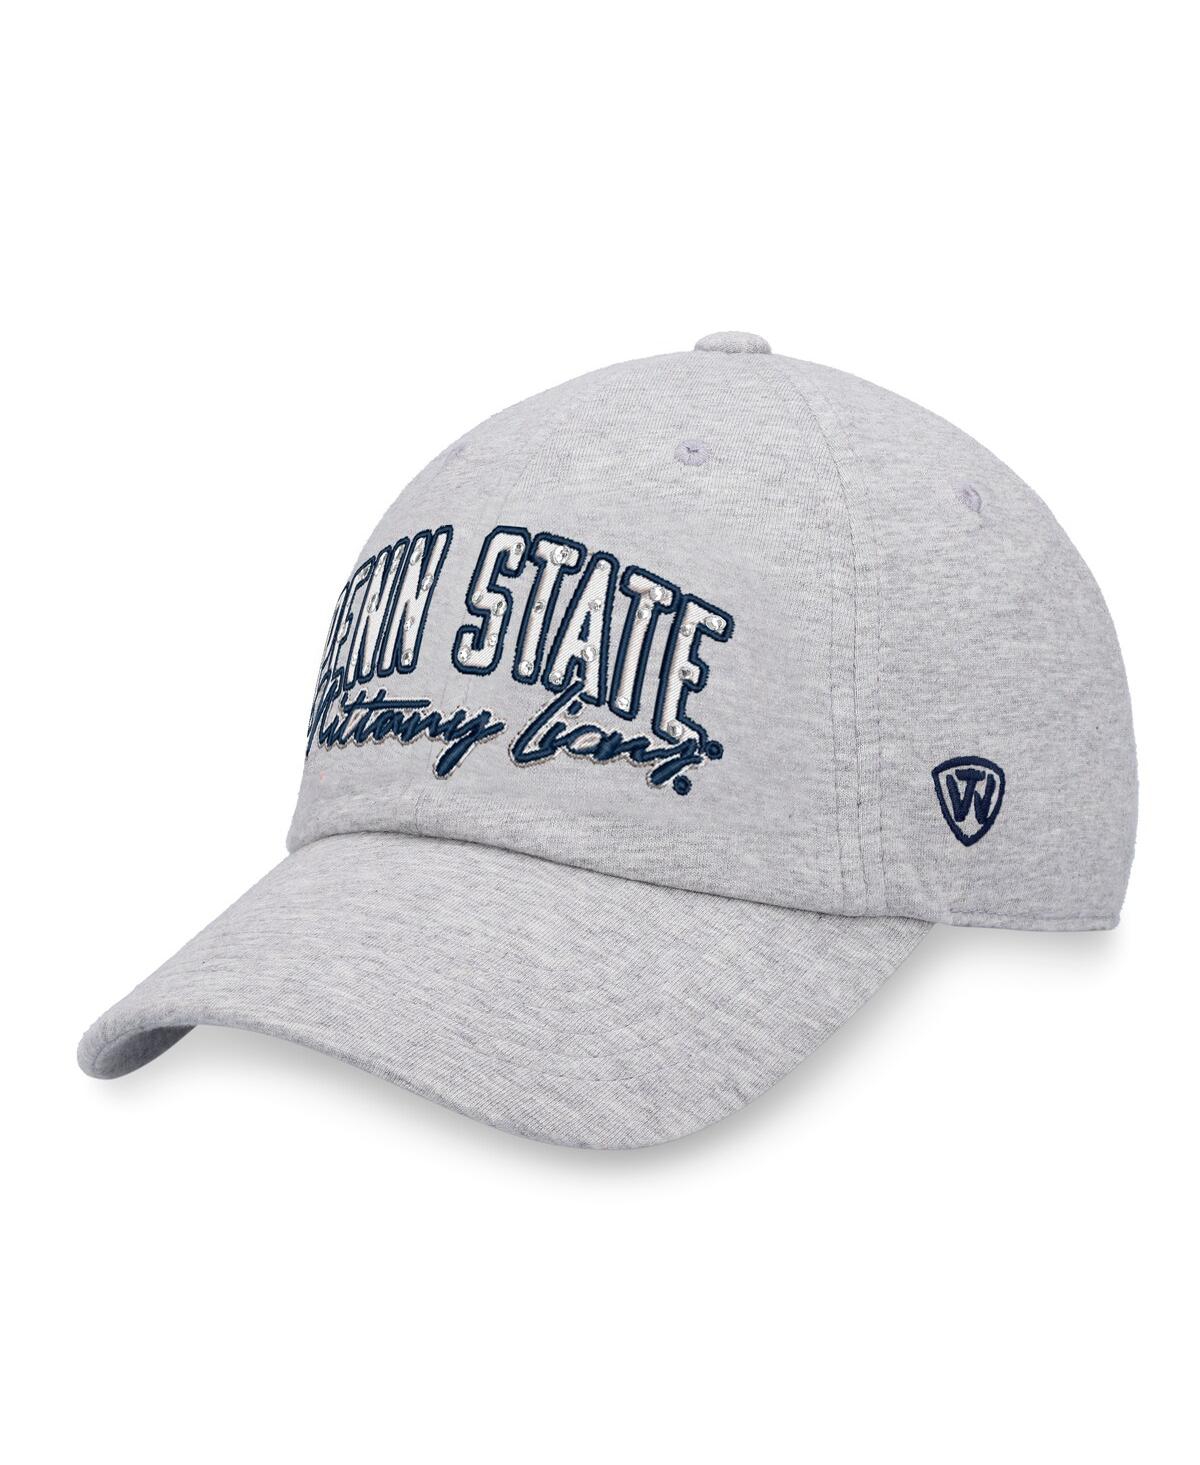 Women's Top of the World Heathered Gray Penn State Nittany Lions Christy Adjustable Hat - Heathered Gray